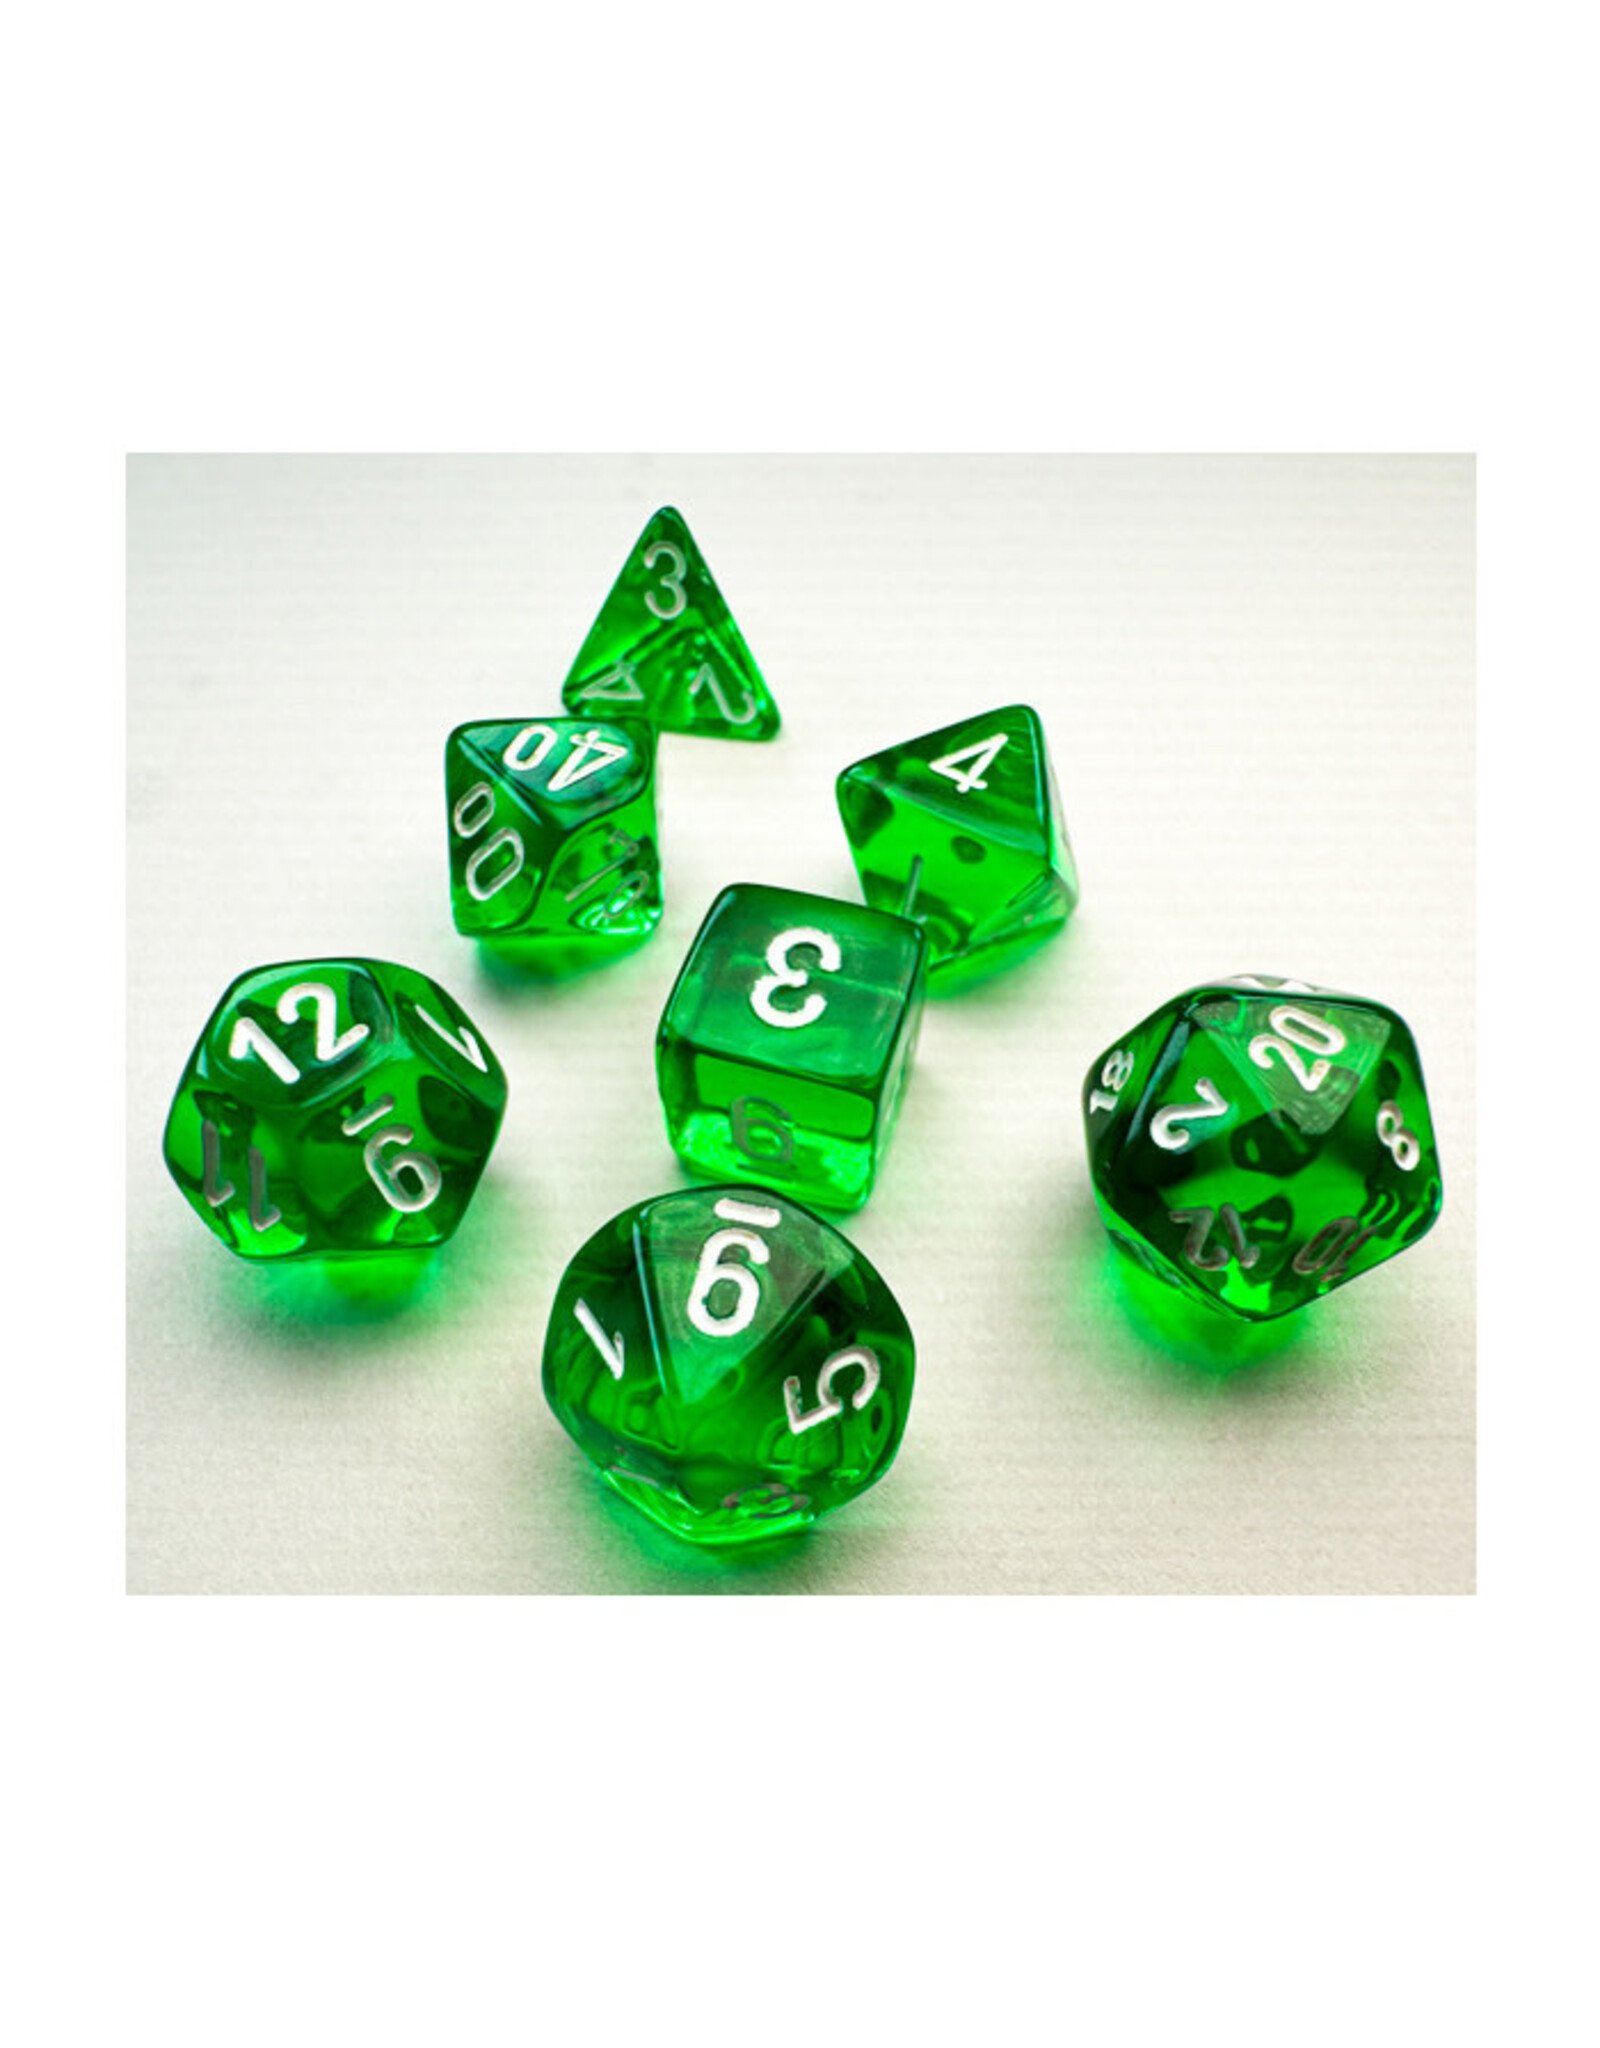 Chessex Mini Translucent Green with White poly 7 set